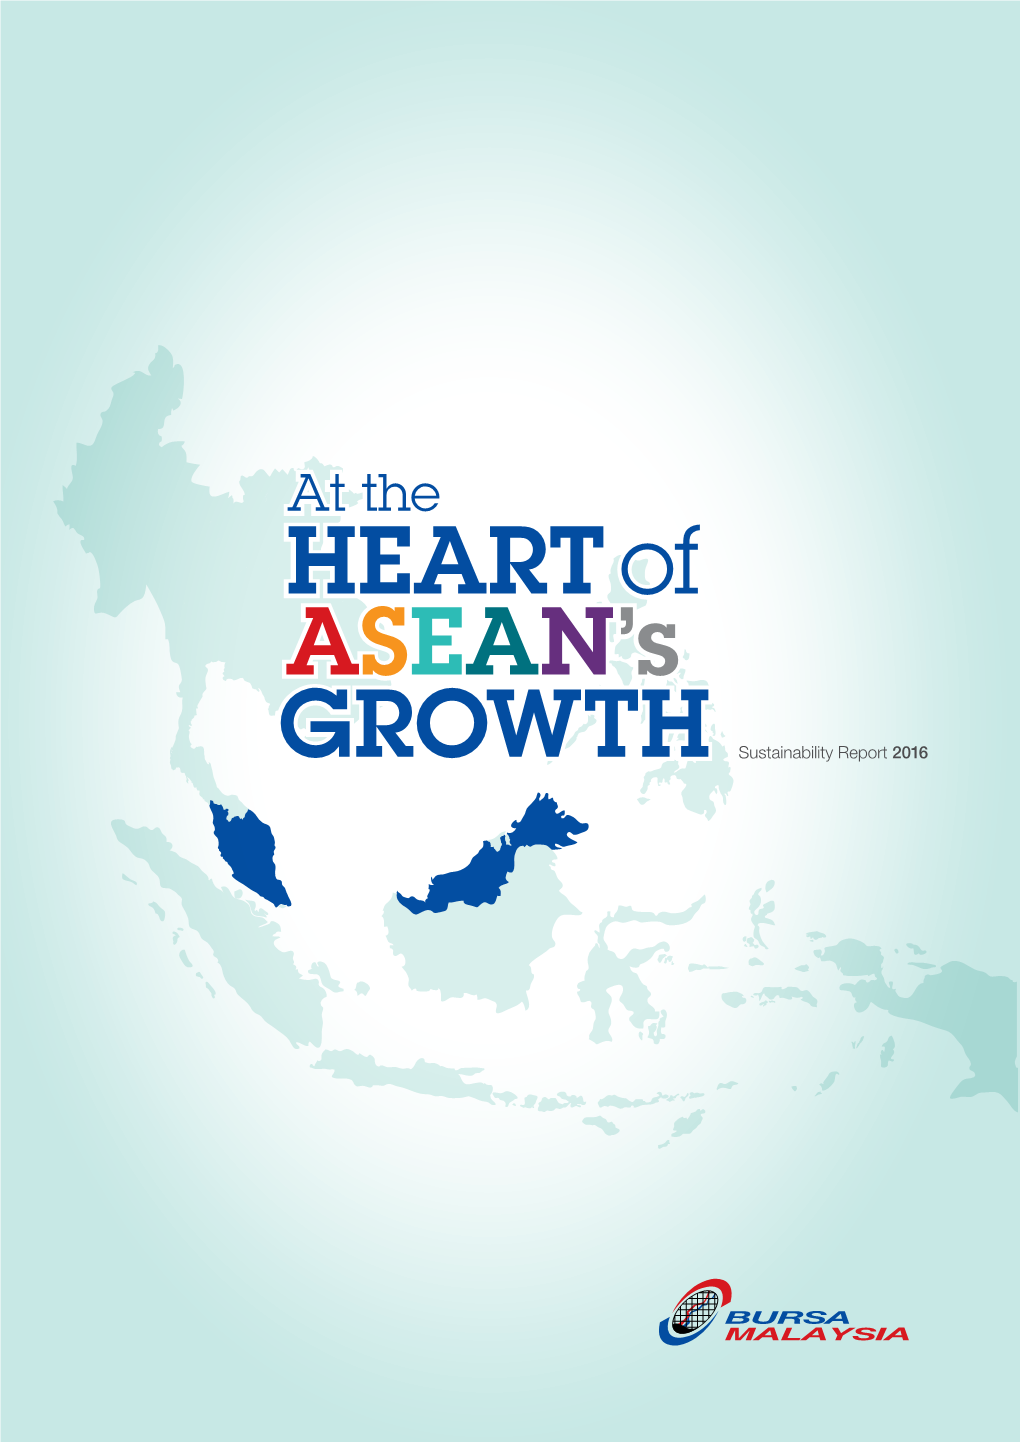 GROWTH ASEAN's HEART Of